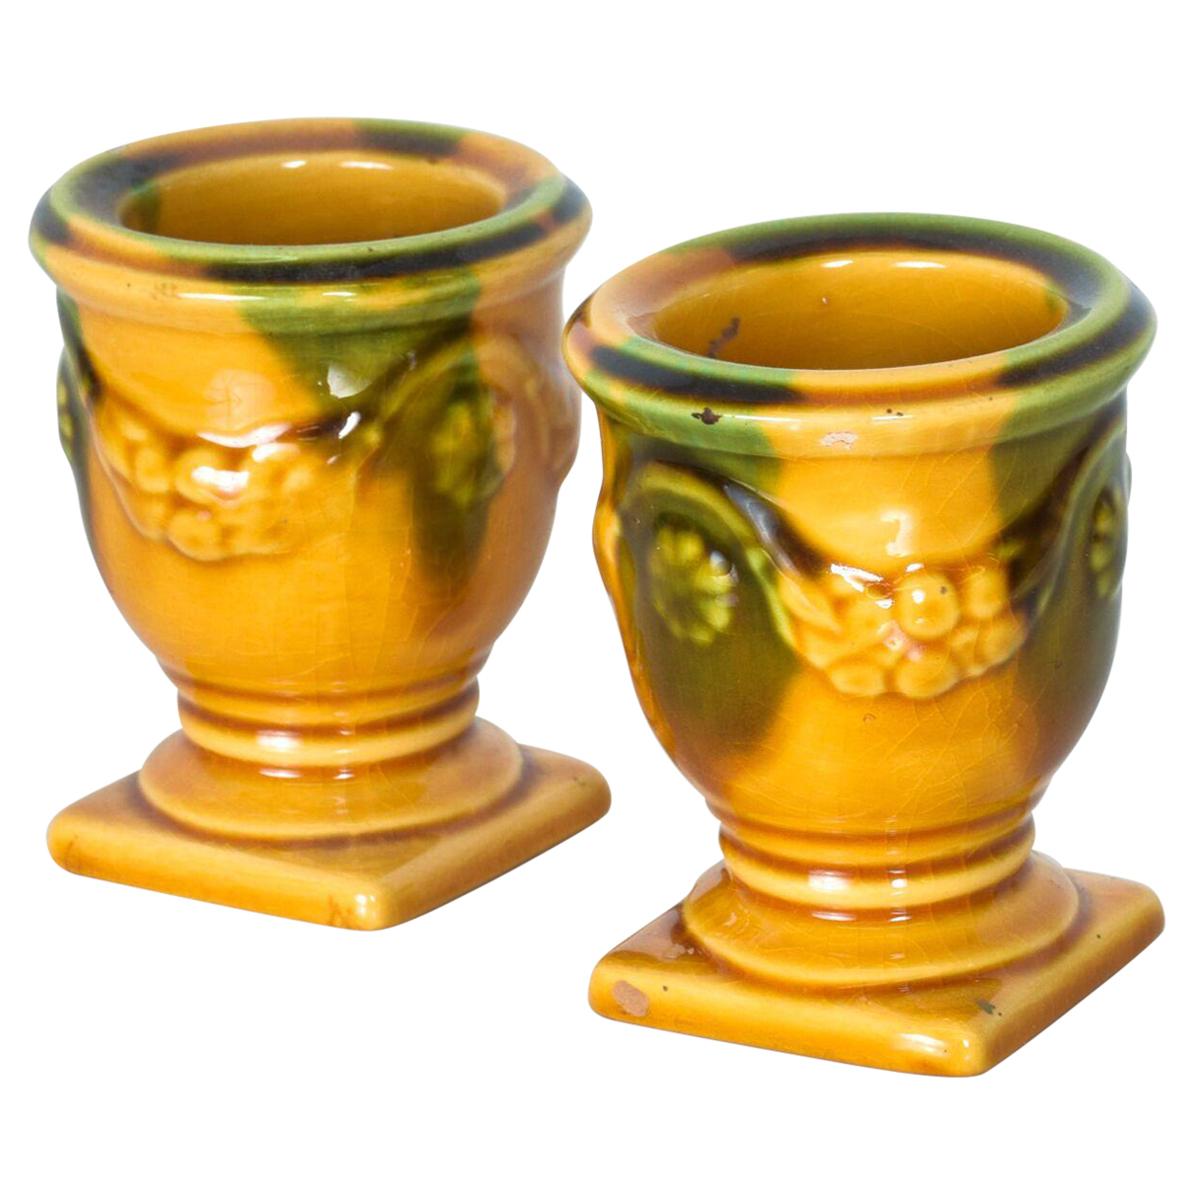 Pair of French Ceramic Candle Holders, Point a la Ligne, Paris, France 1960s
Label present
Dimensions: 3 H x 2.5 in diameter
Original Preowned Vintage Condition. Wear and use visible.
See images provided. 

    